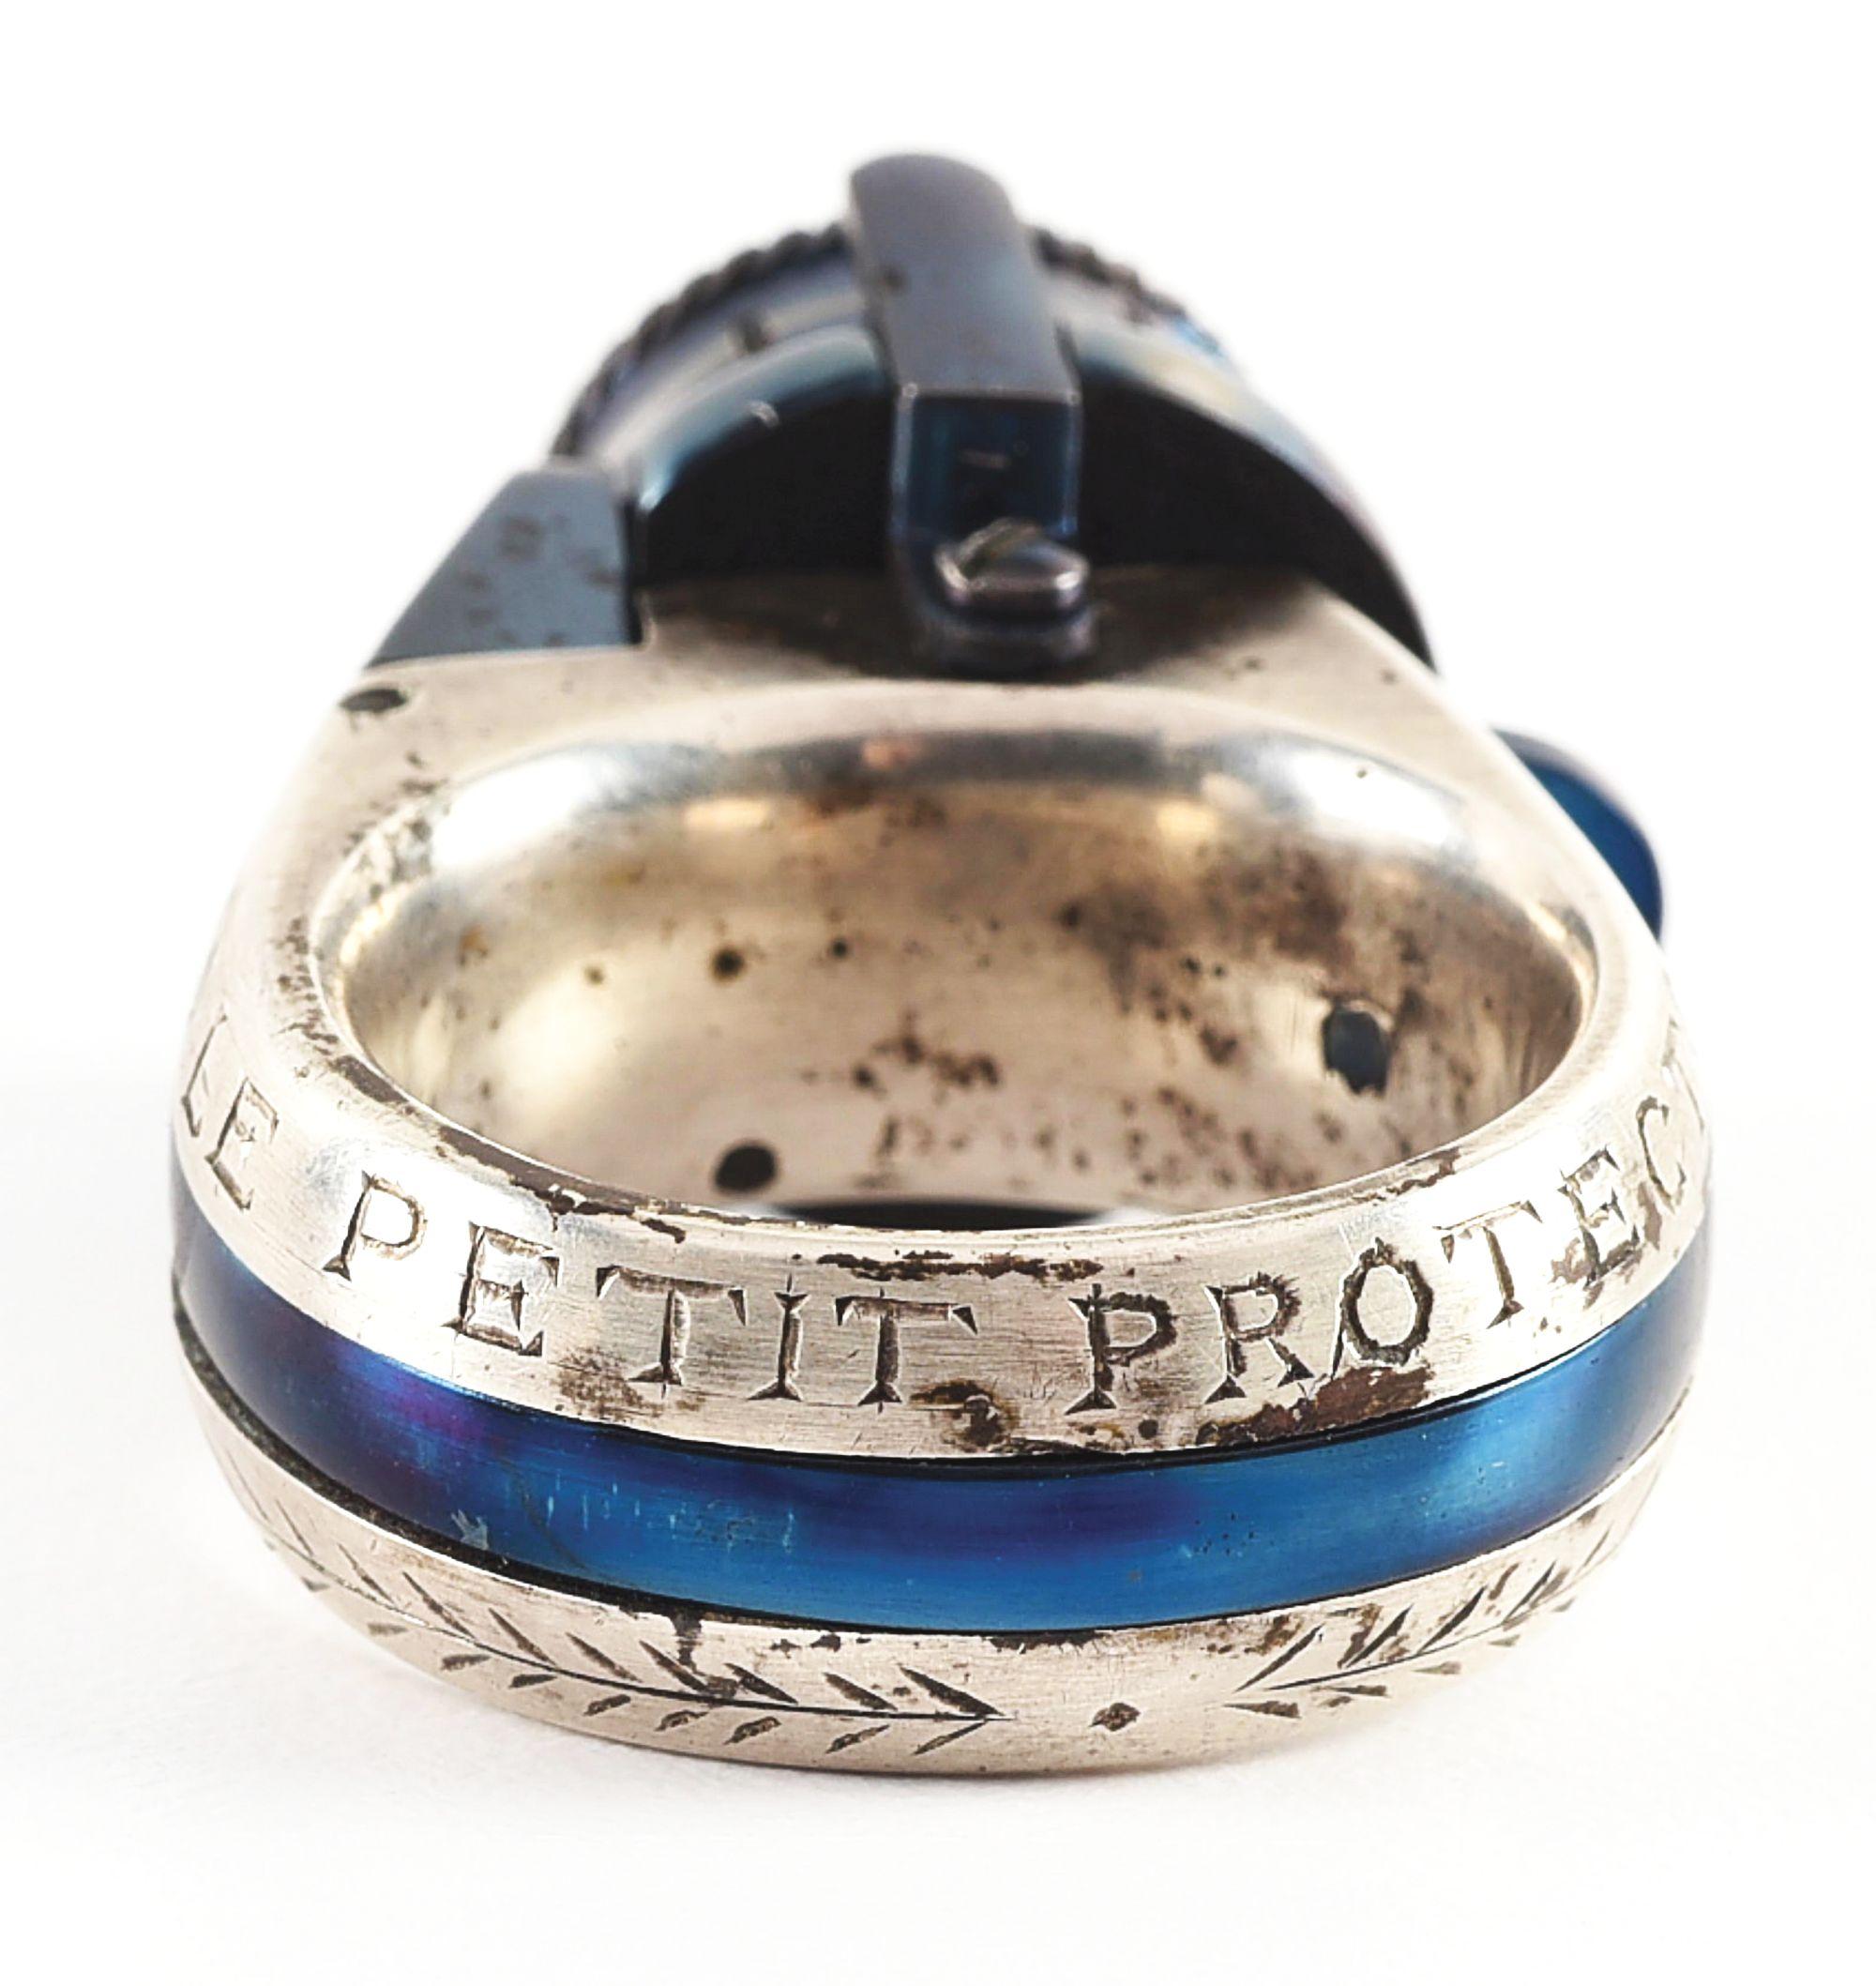 (A) BEAUTIFUL CASED LE PETIT PROTECTOR RING REVOVLER.